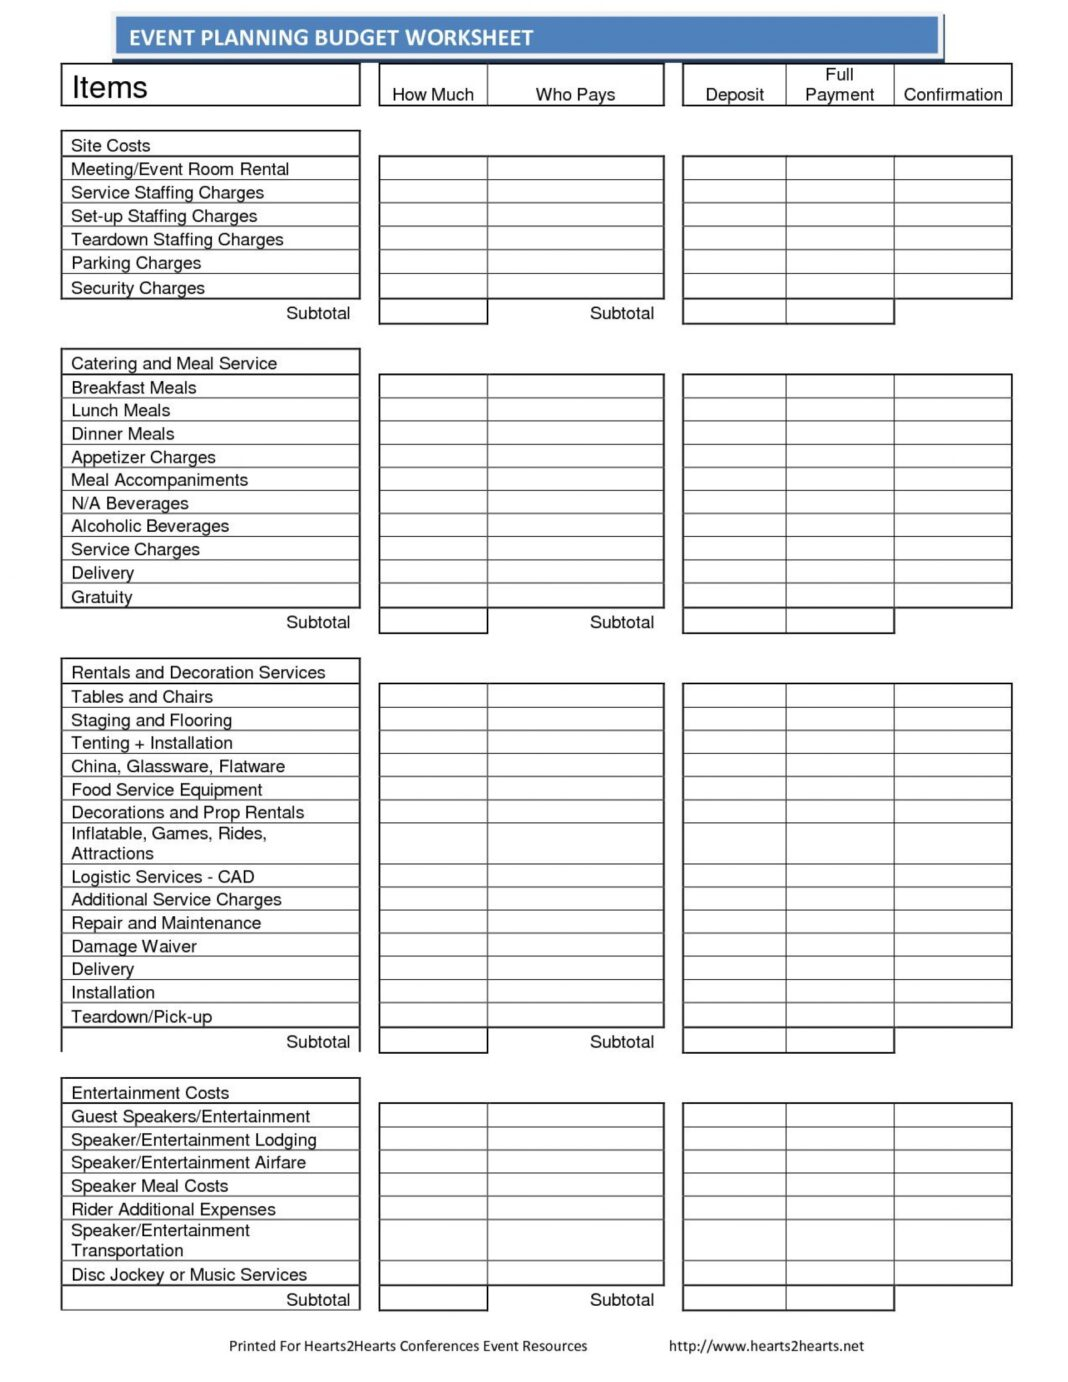 Event Planning Budget Template Addictionary Cost Worksheet  Regarding Party Planning Budget Template Regarding Party Planning Budget Template